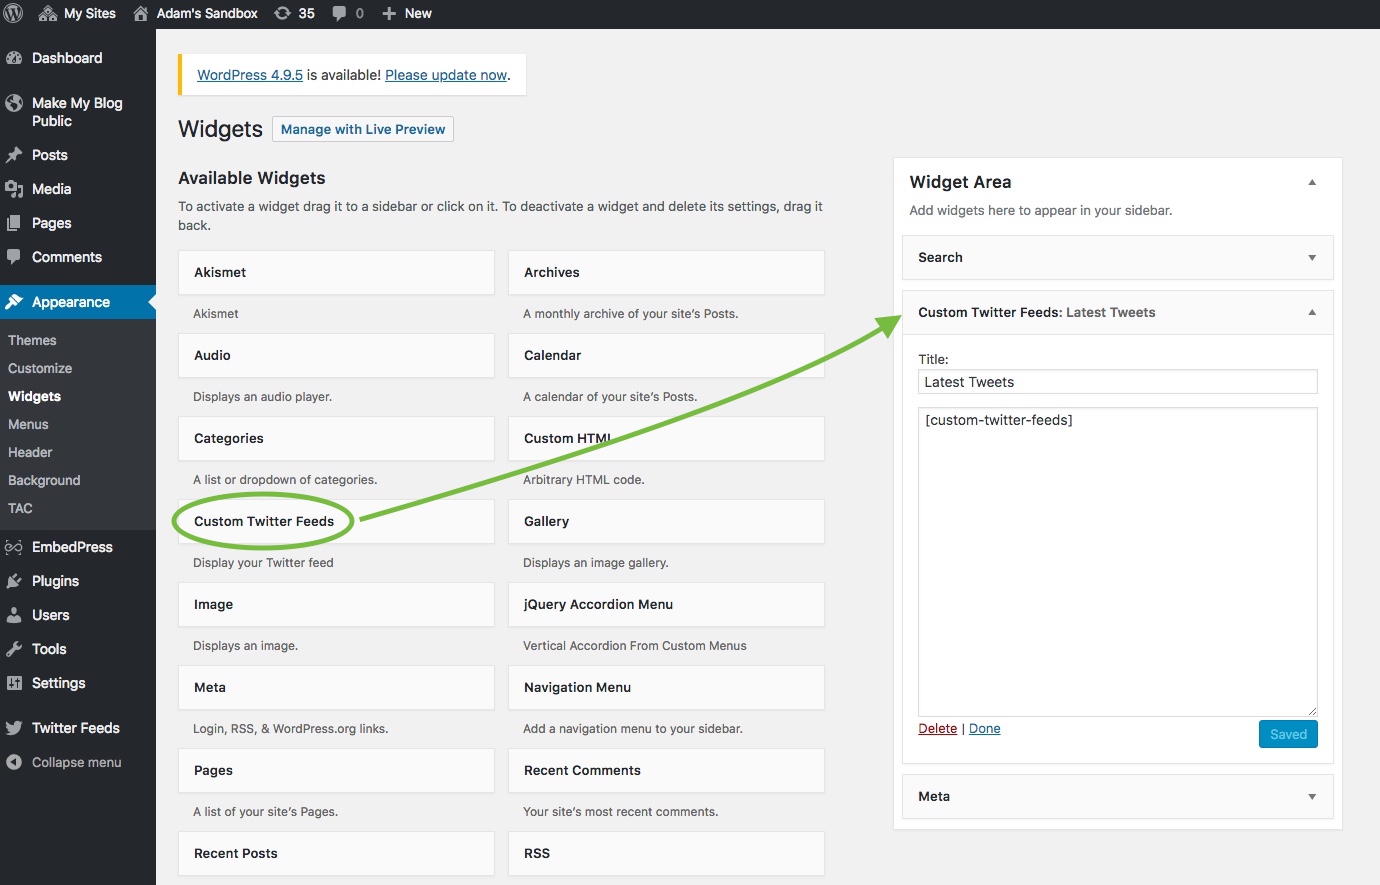 The WordPress Widgets page. An arrow connects a widget on the left with a widget area on the right.